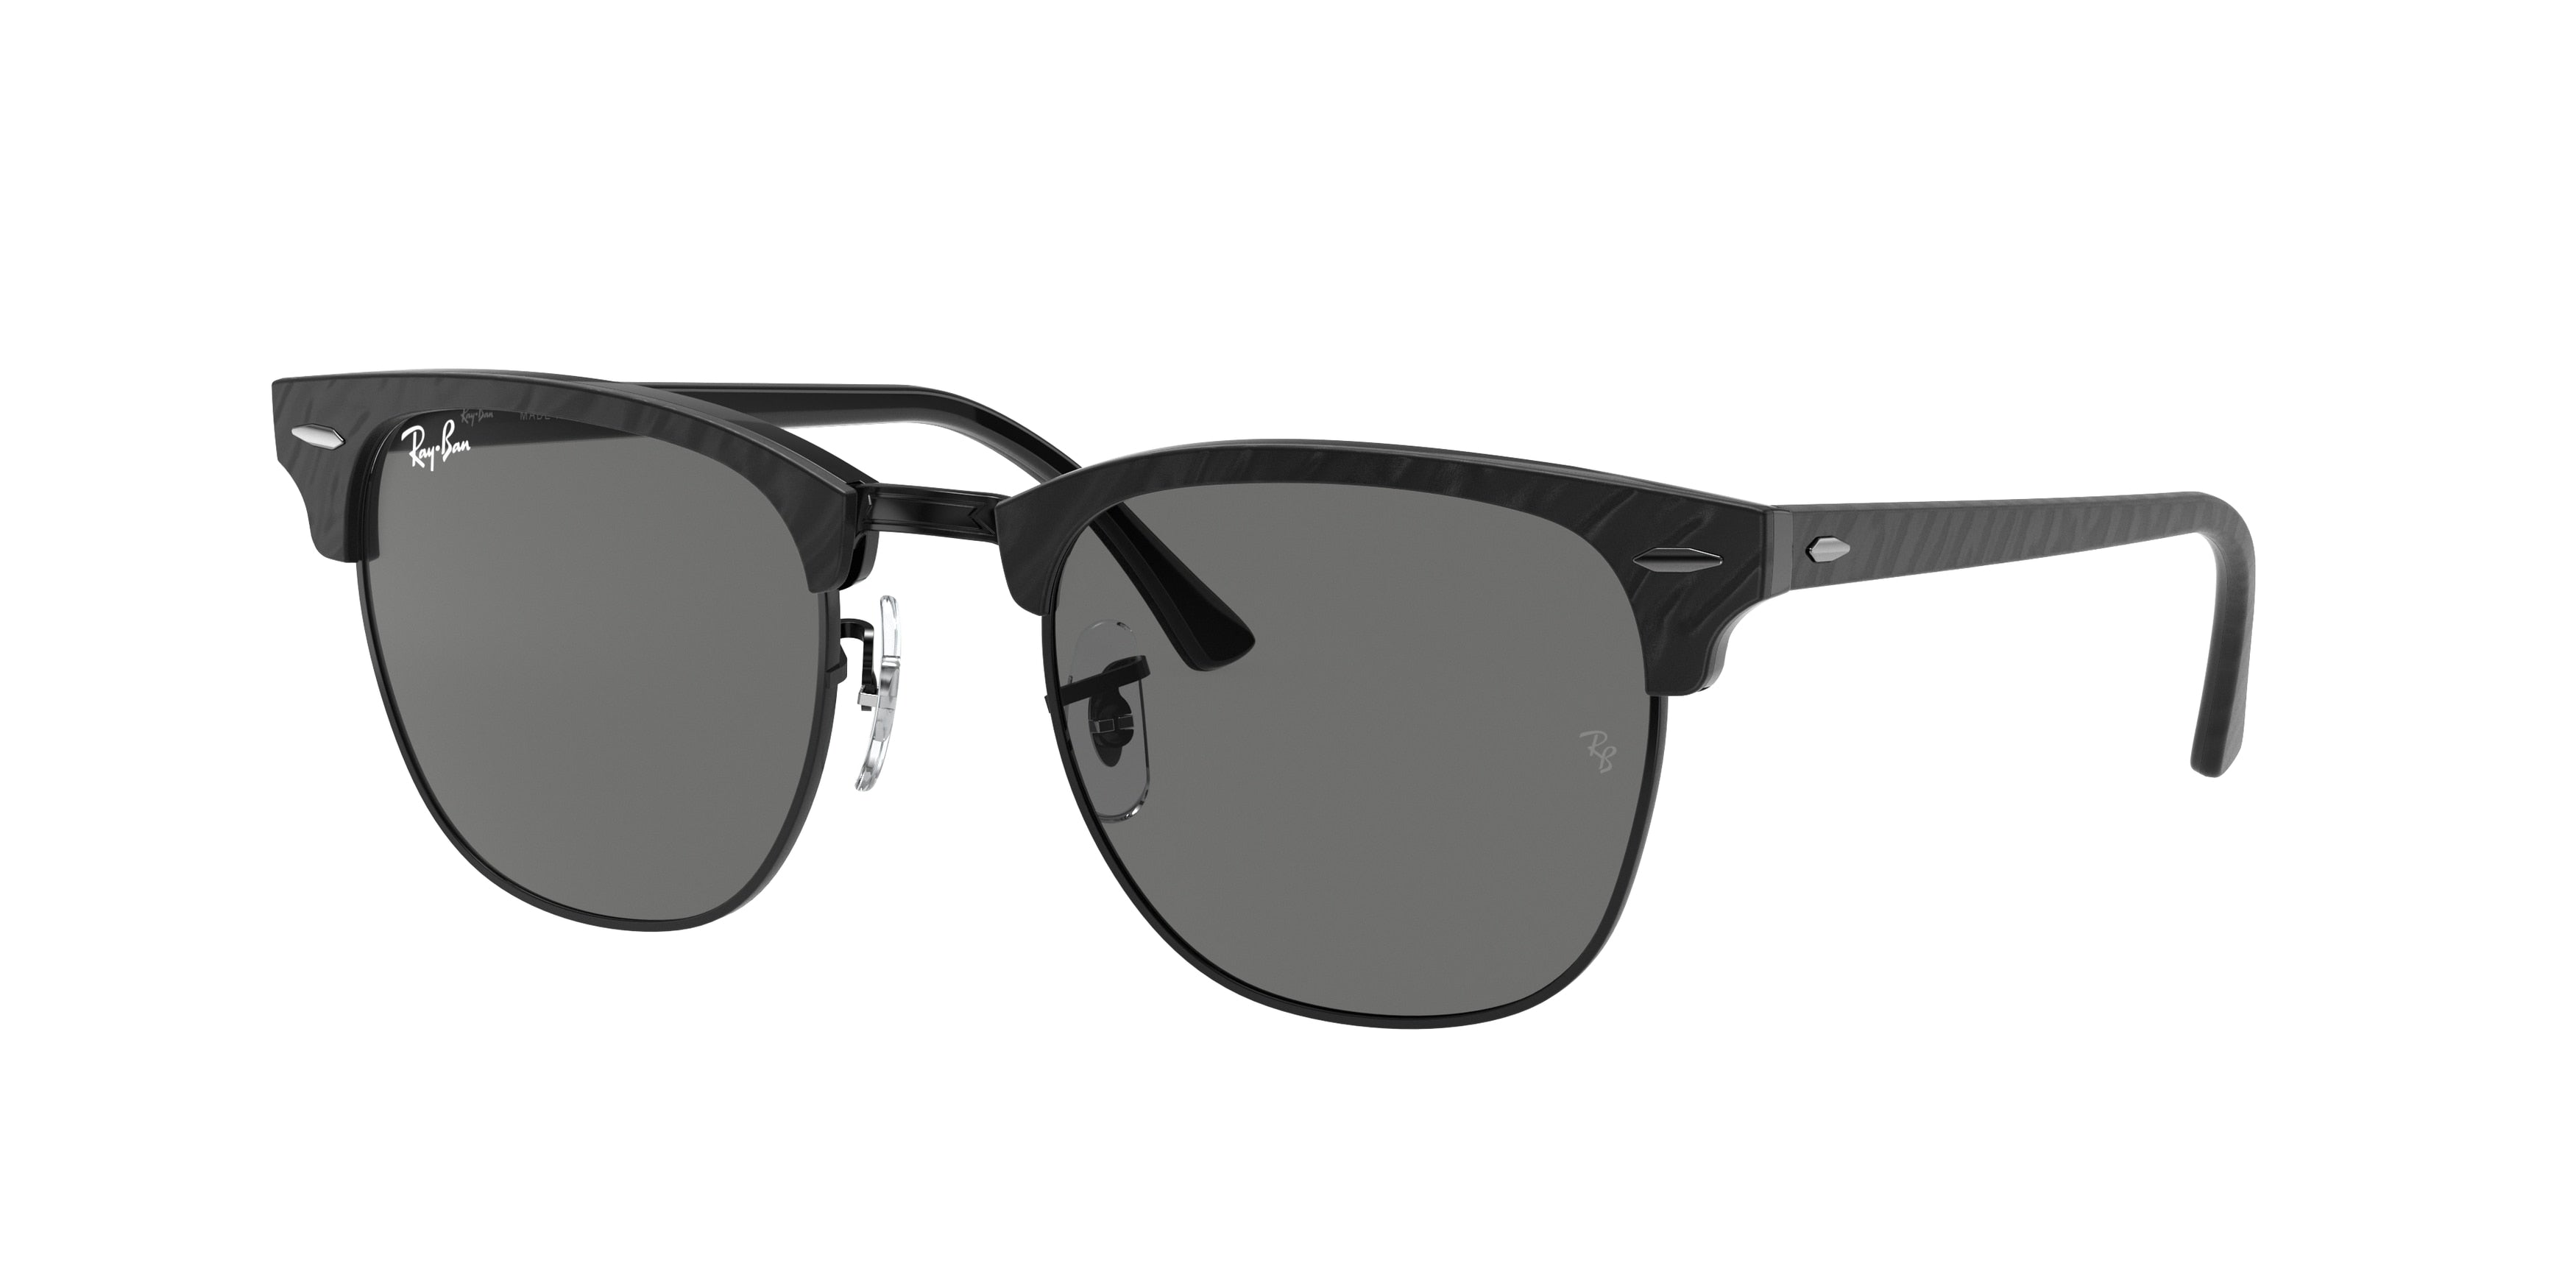 Ray-Ban CLUBMASTER RB3016 Square Sunglasses  1305B1-Black 50-145-21 - Color Map Black